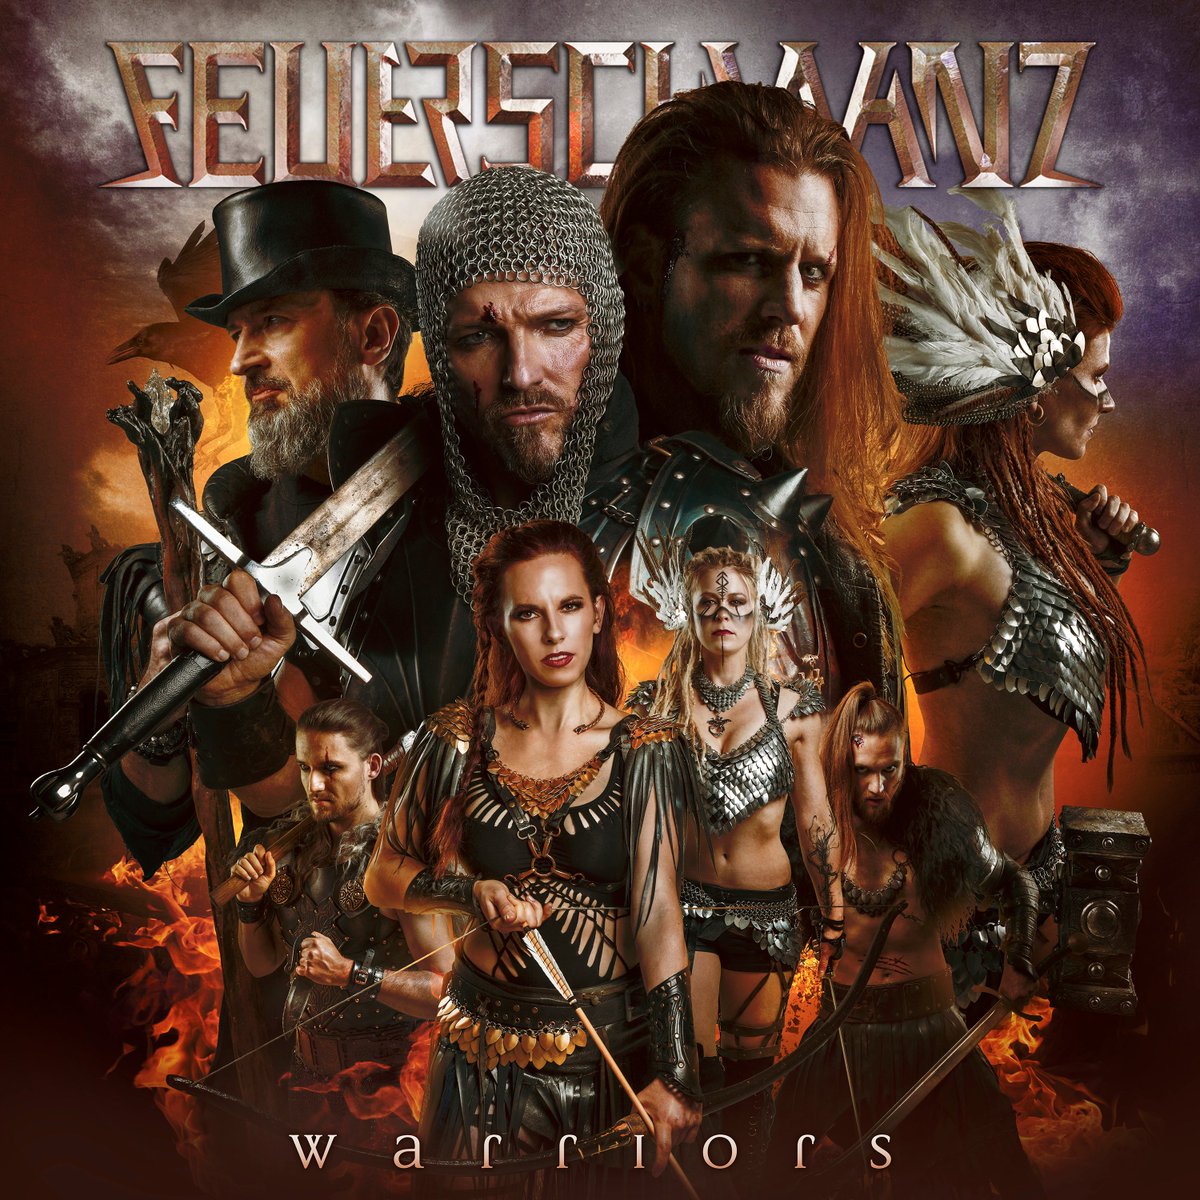 Happy Releaseday, Feuerschwanz @metundmiezen ! 🤘 ⚔️ Special Album, Warriors is out today! ⚔️ Listen and Order here: lnk.to/FS-Warriors Have you picked your favorite song yet? 🔥